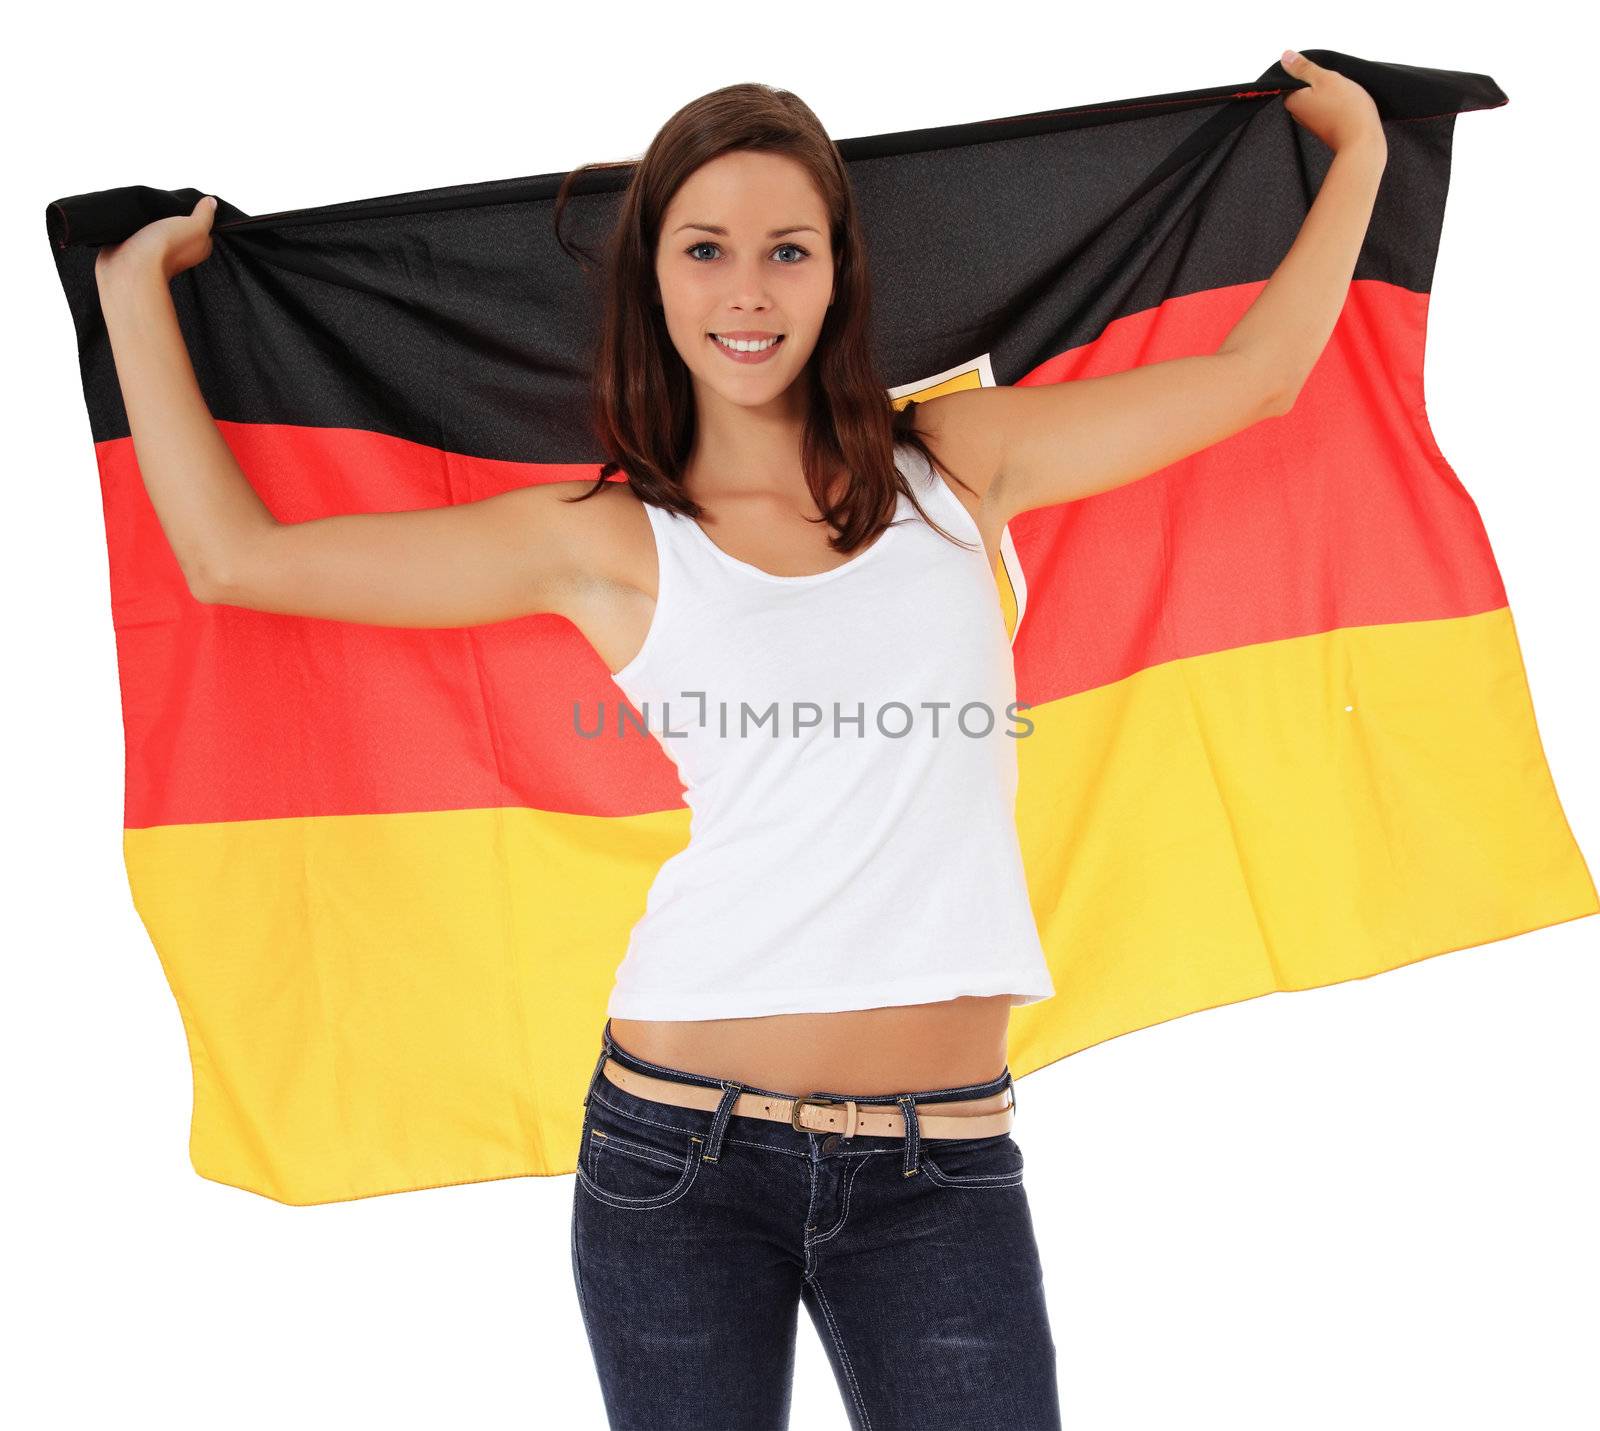 Attractive young woman cheering. All on white background.